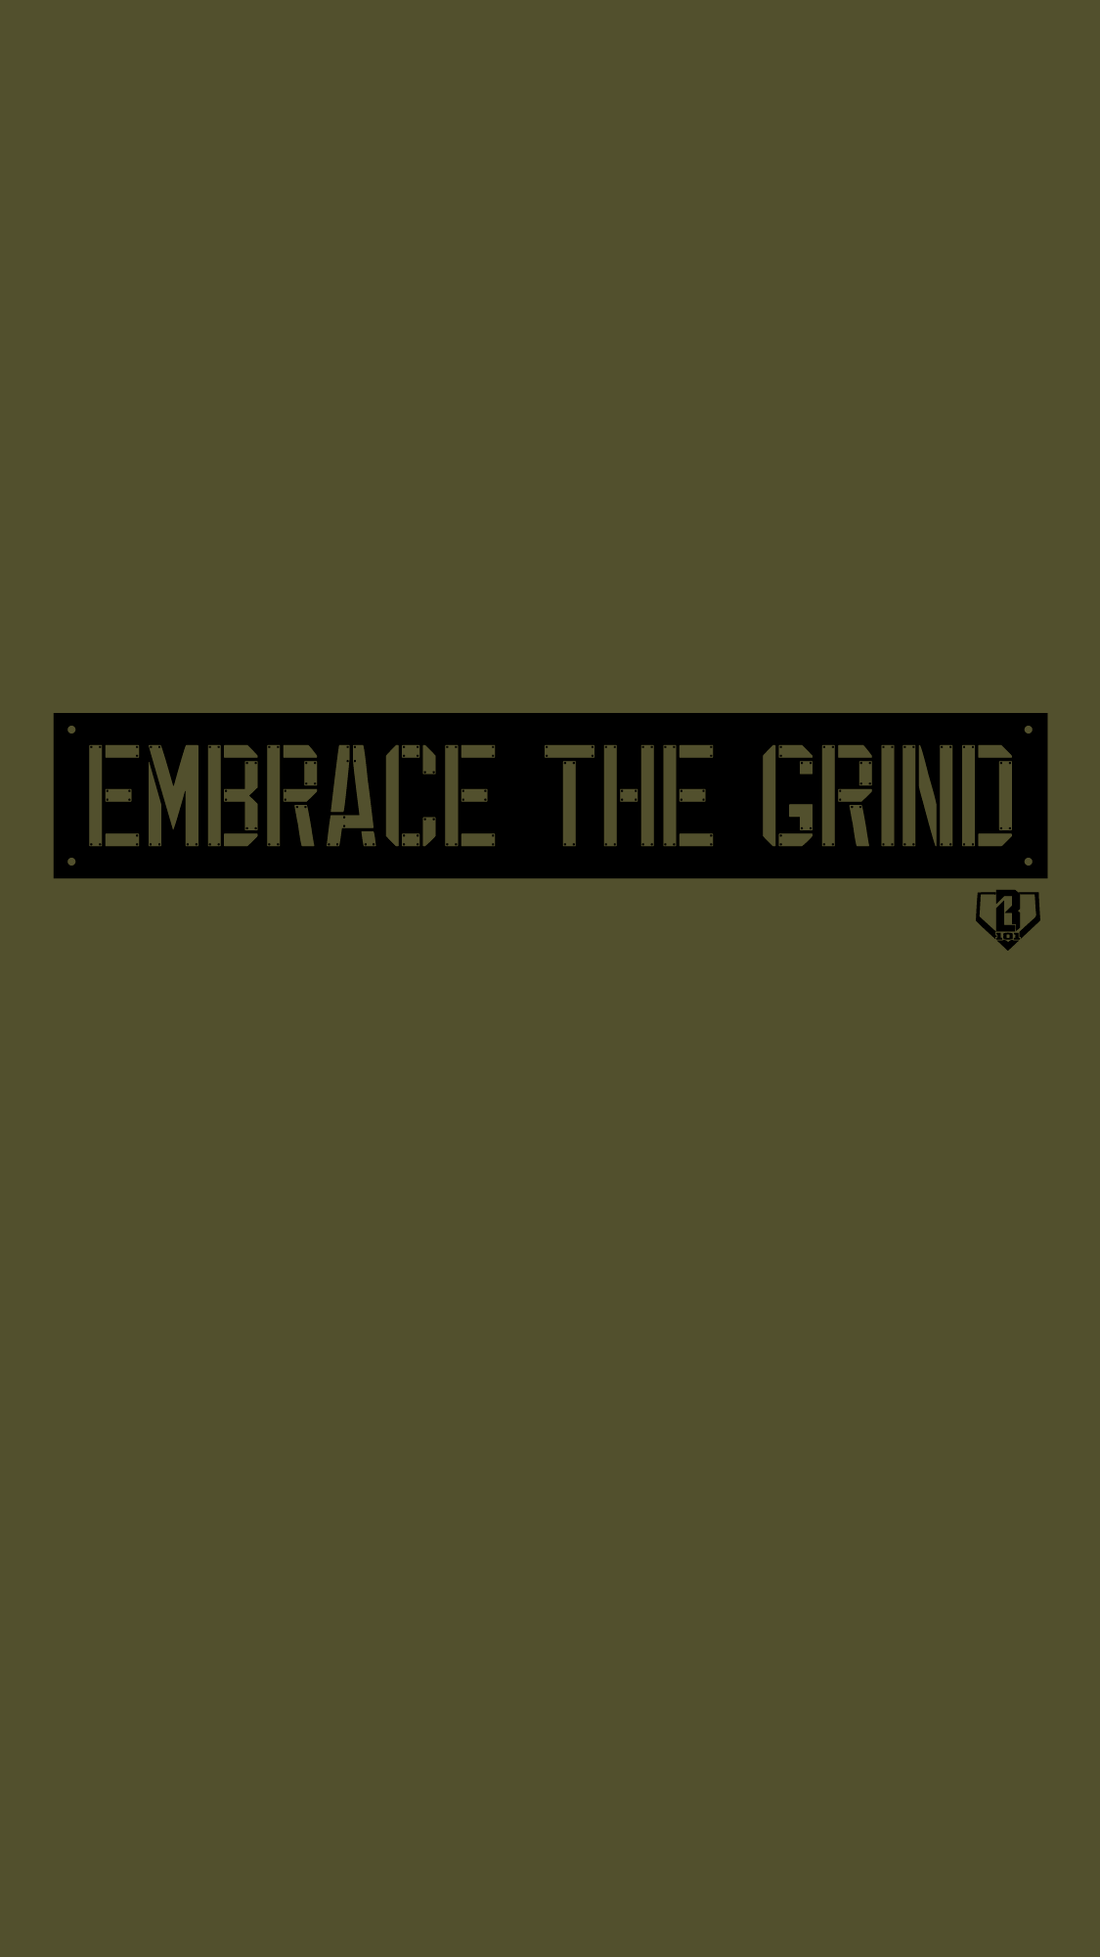 Wallpaper Wednesday - Embrace the Grind